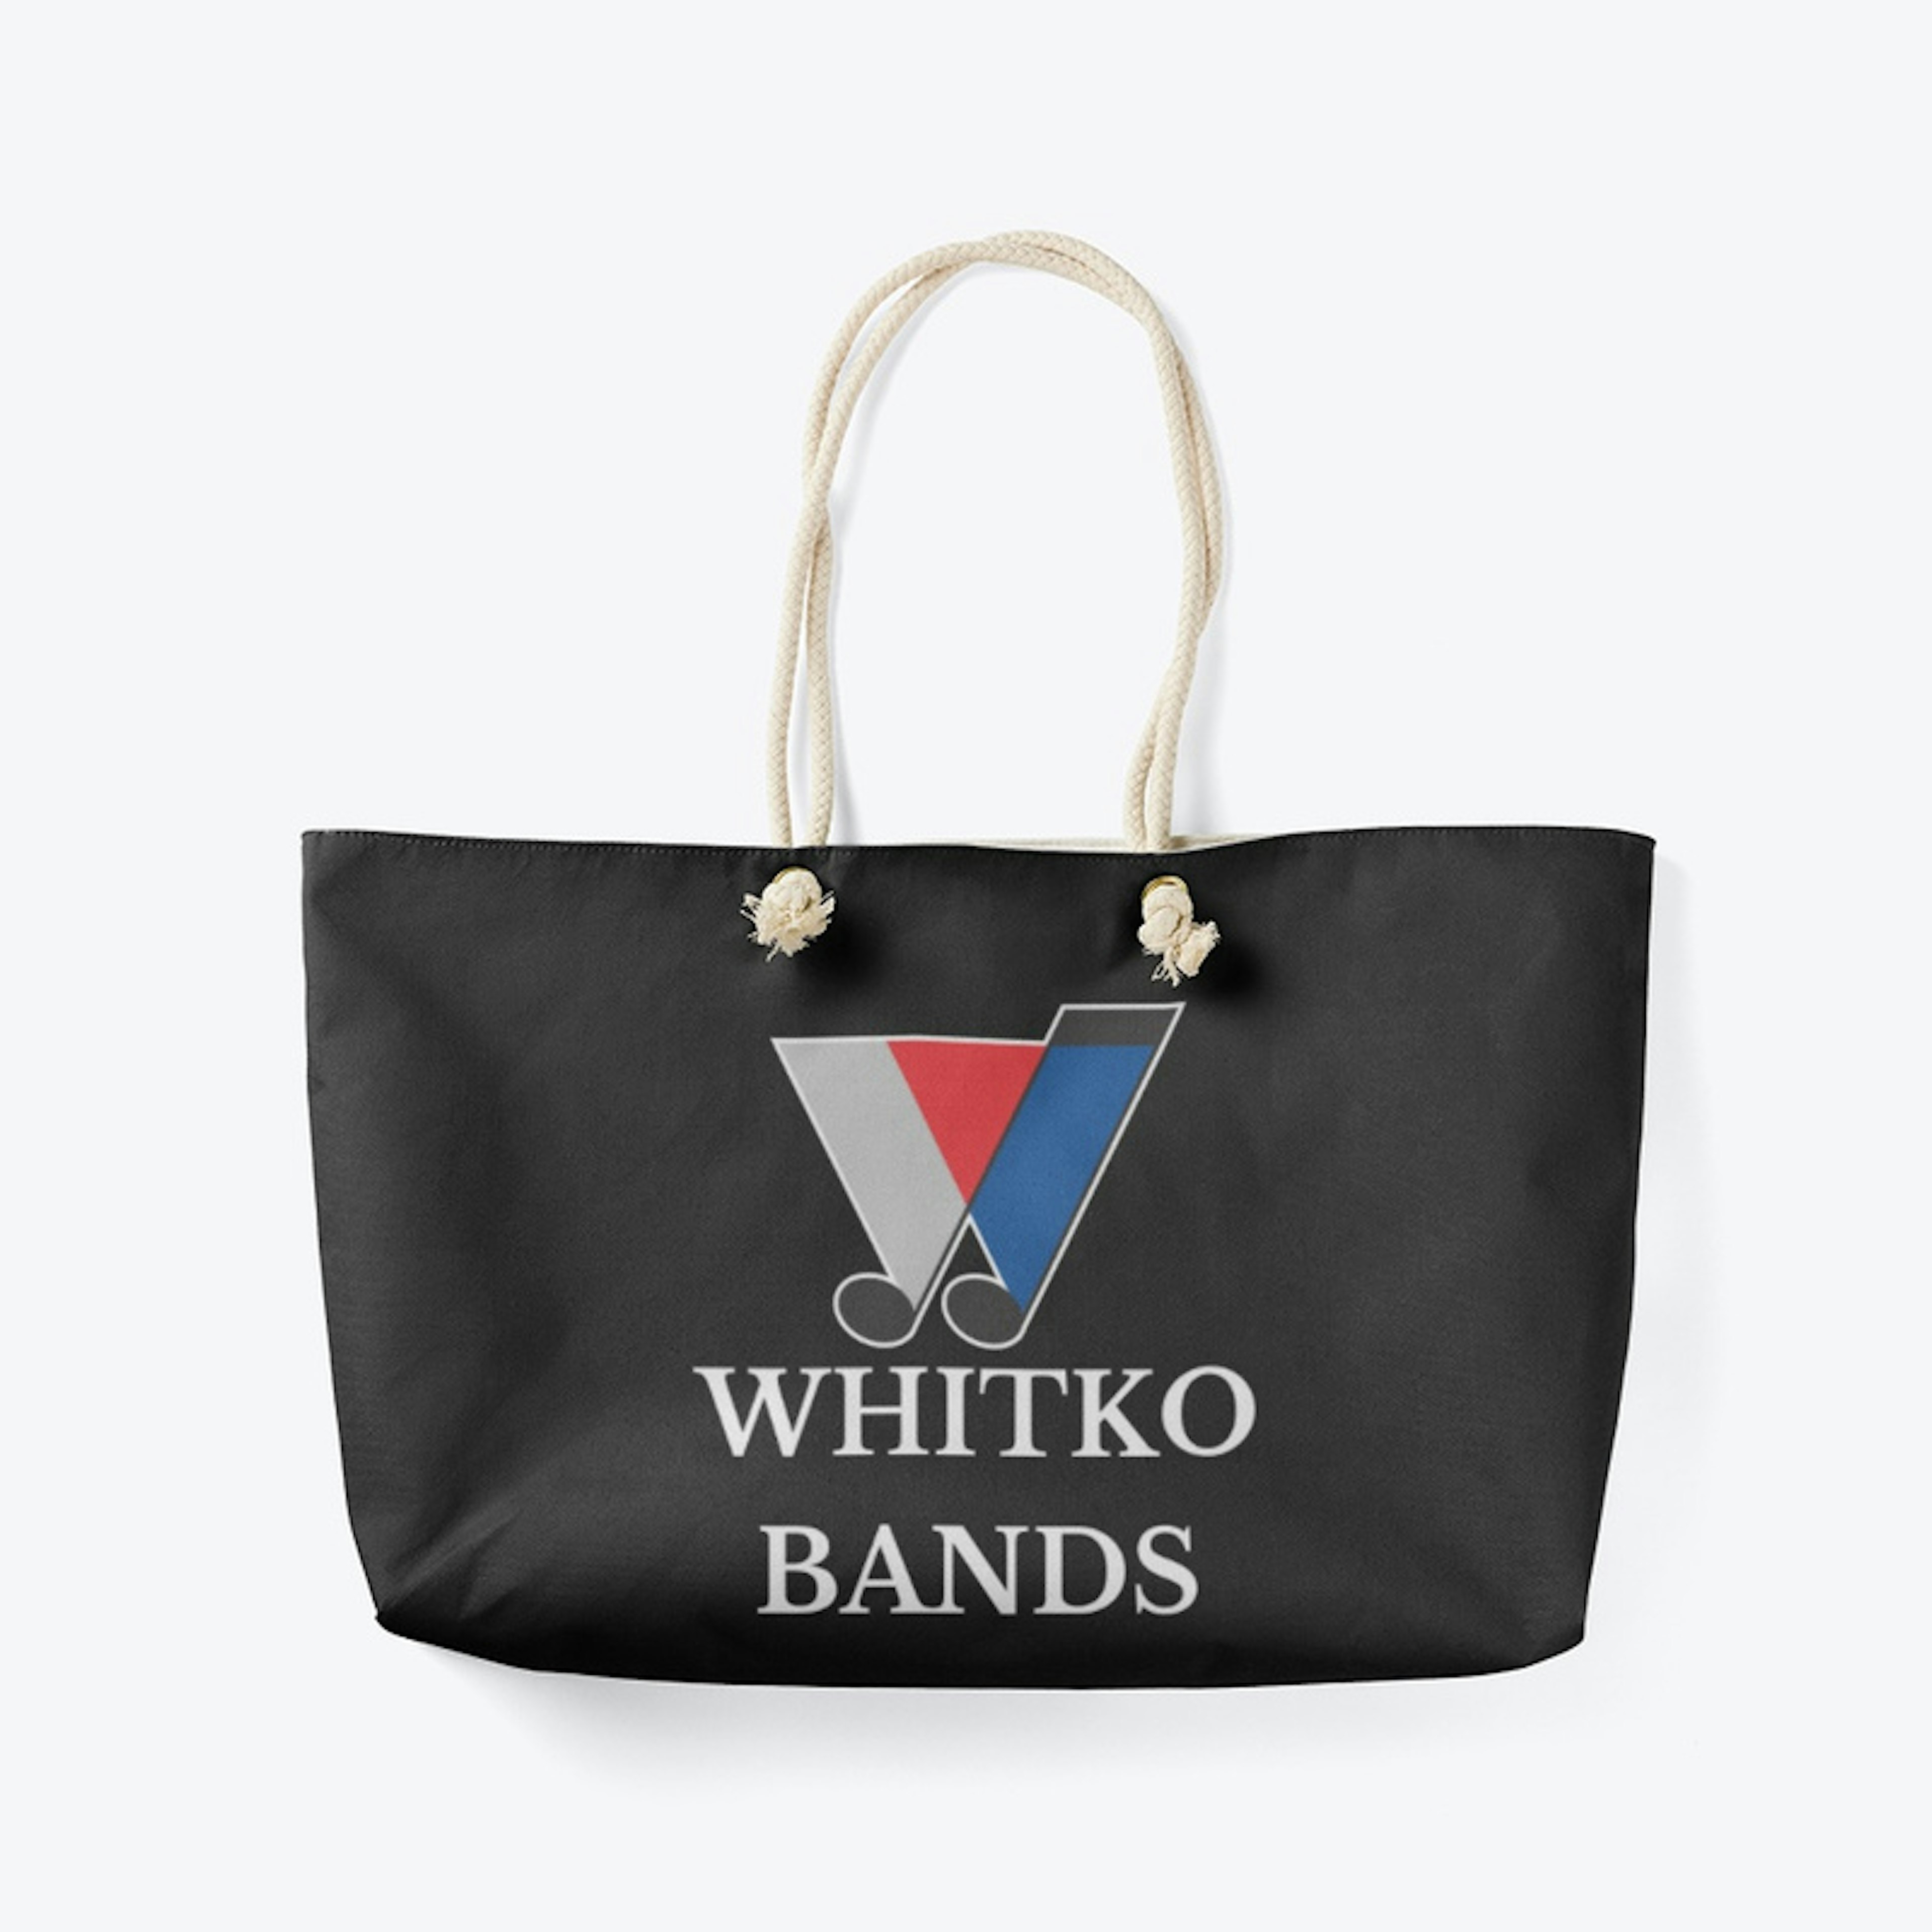 Whitko Bands